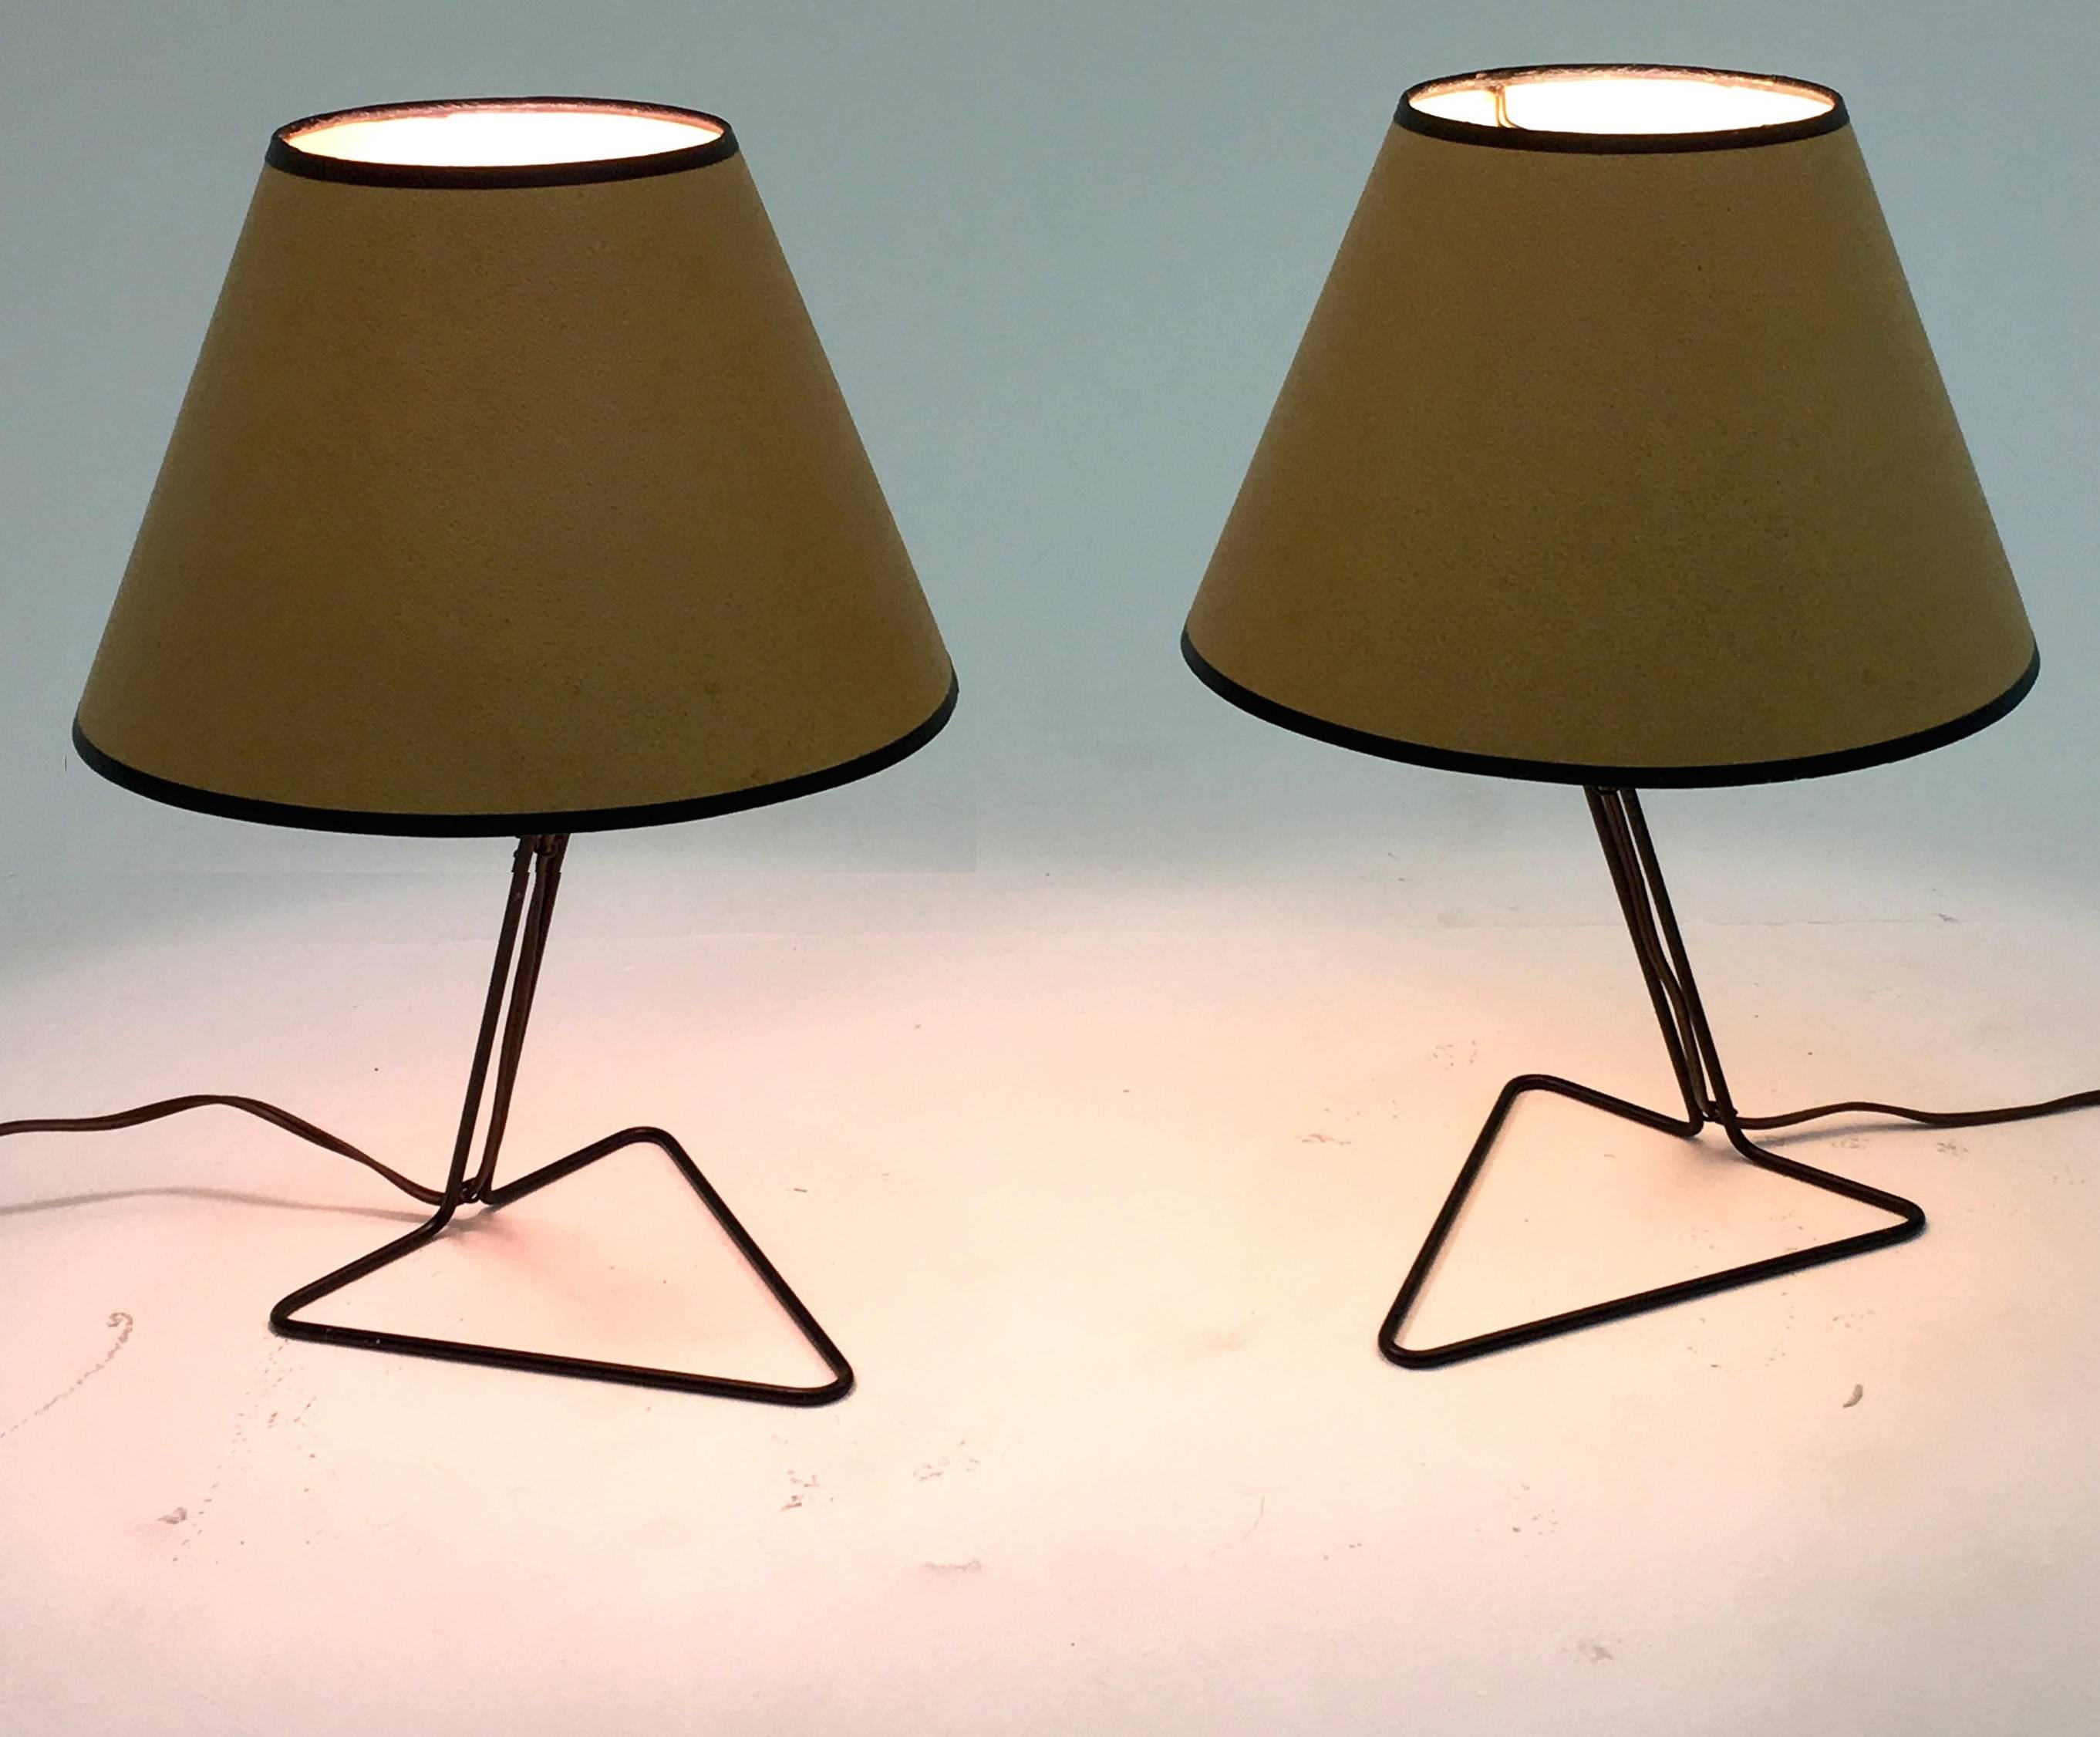 Table lamps or wall sconces
Circa 1940
14